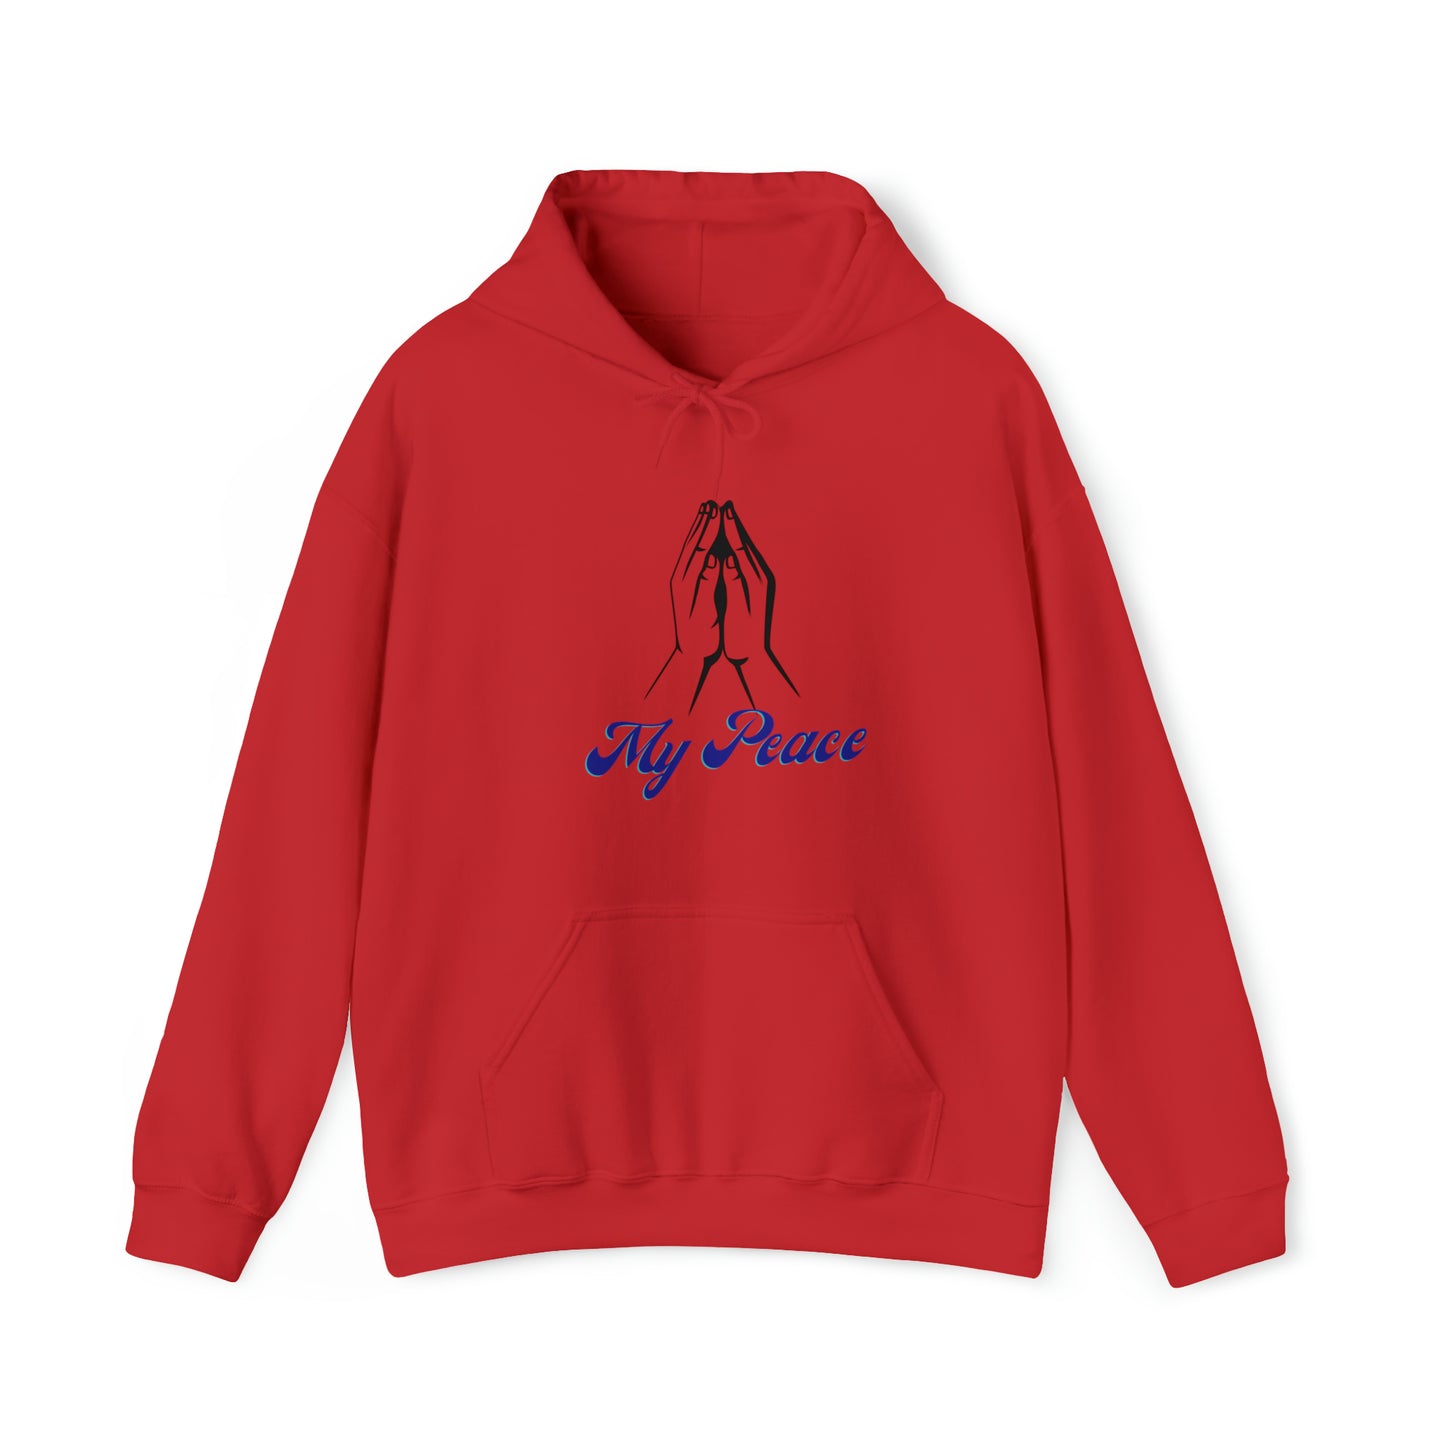 Clasping hands statement unisex hoodie gift